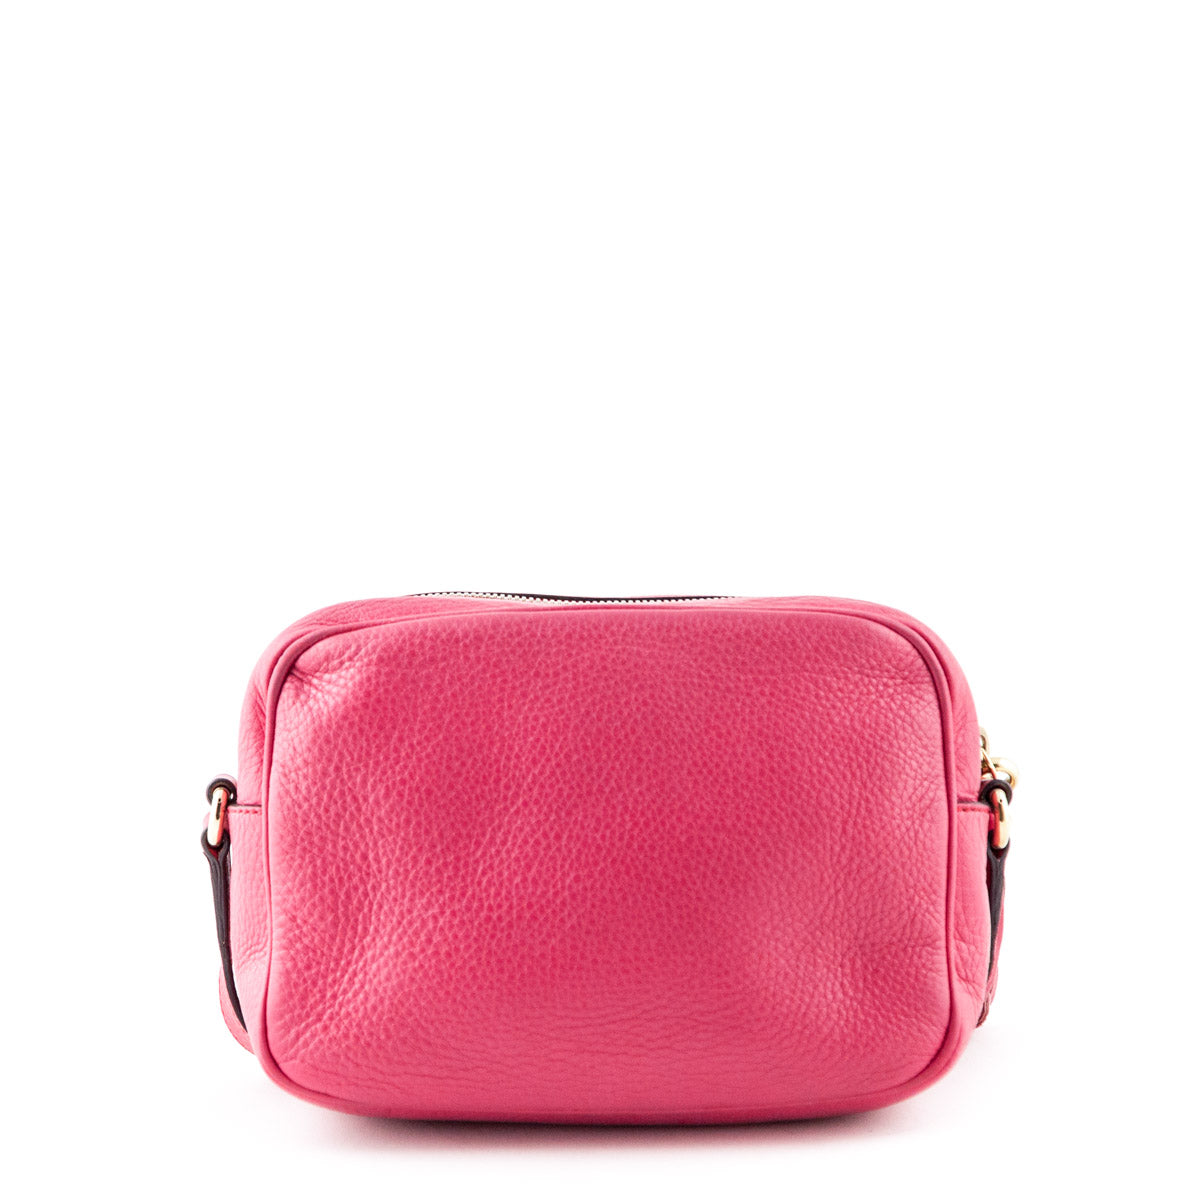 Gucci Pink Soho Disco - Luxury Consignment for Bags in Canada